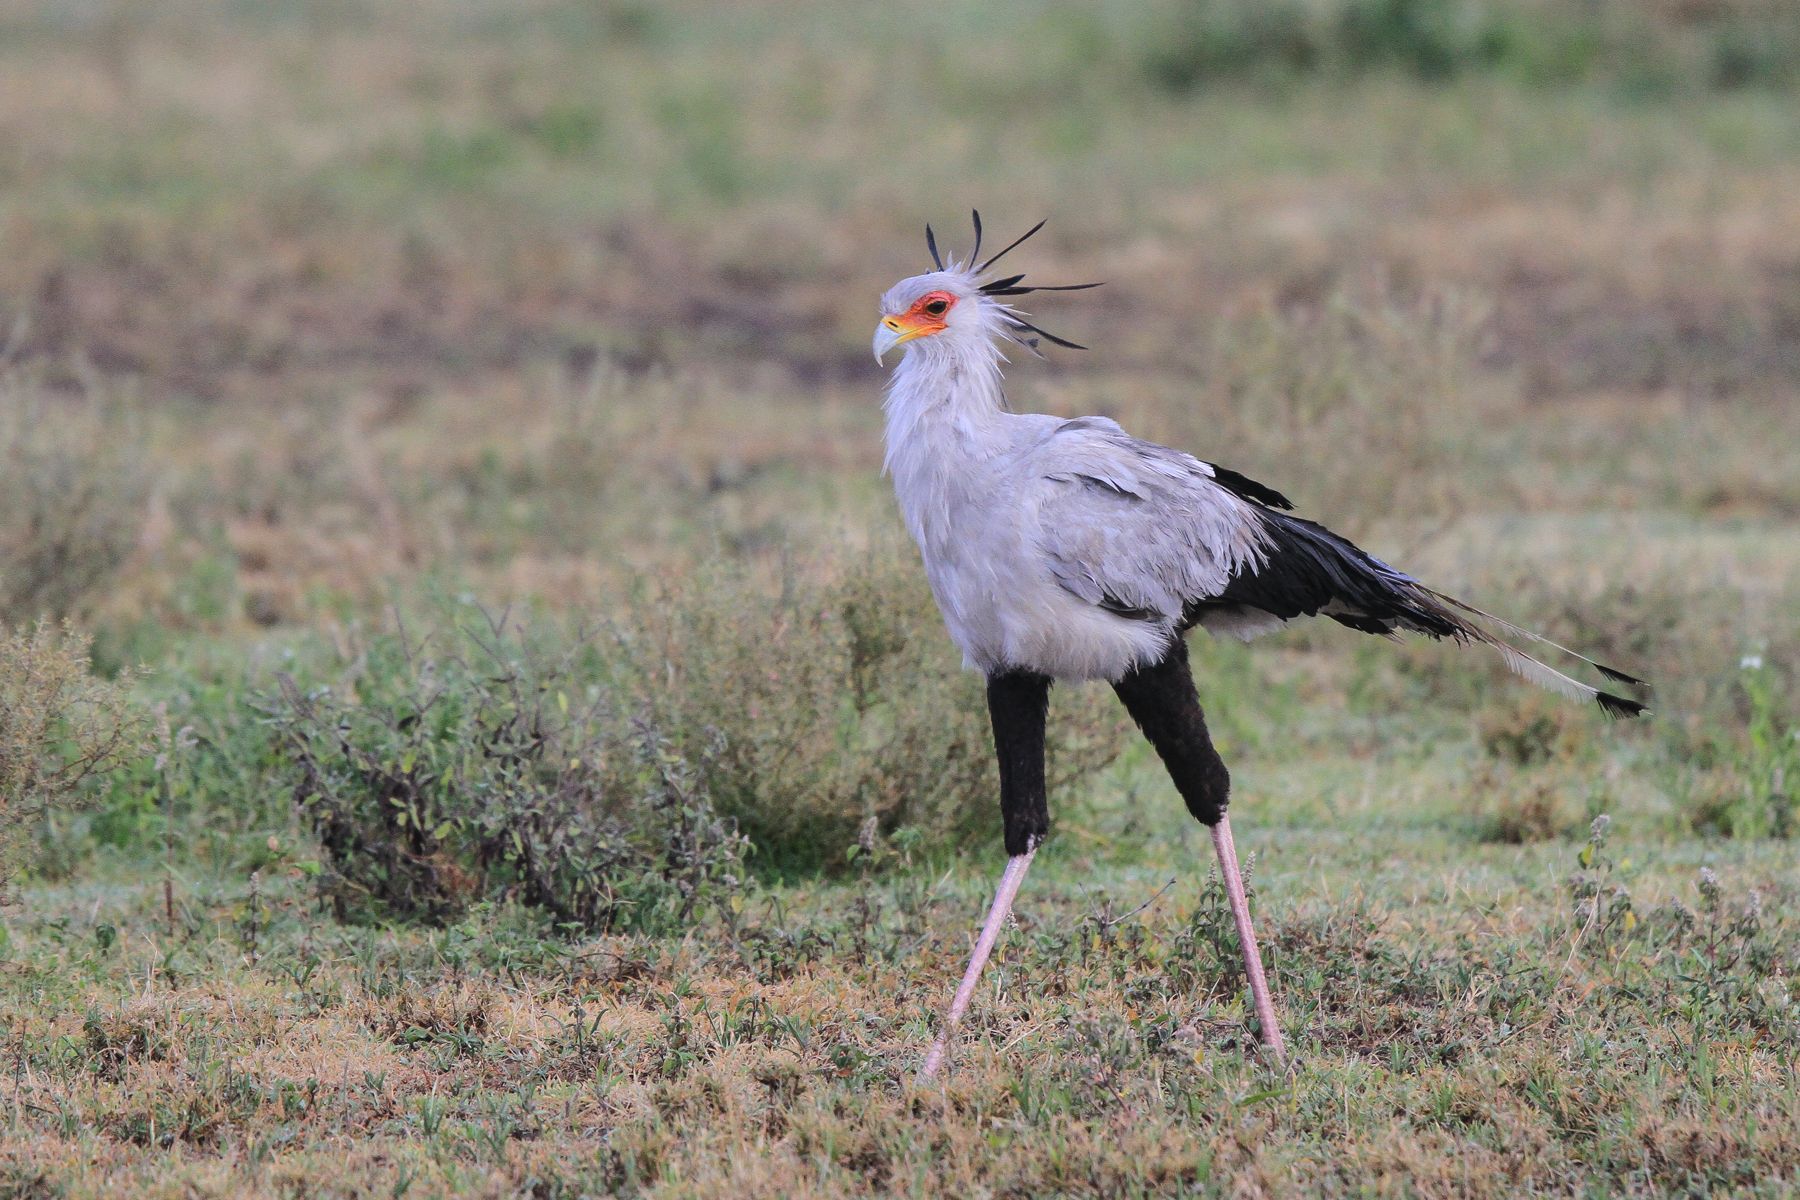 A Secretarybird, so named because its head plumes resemble the quill pens used by 18th century secretaries, patrols the grassland